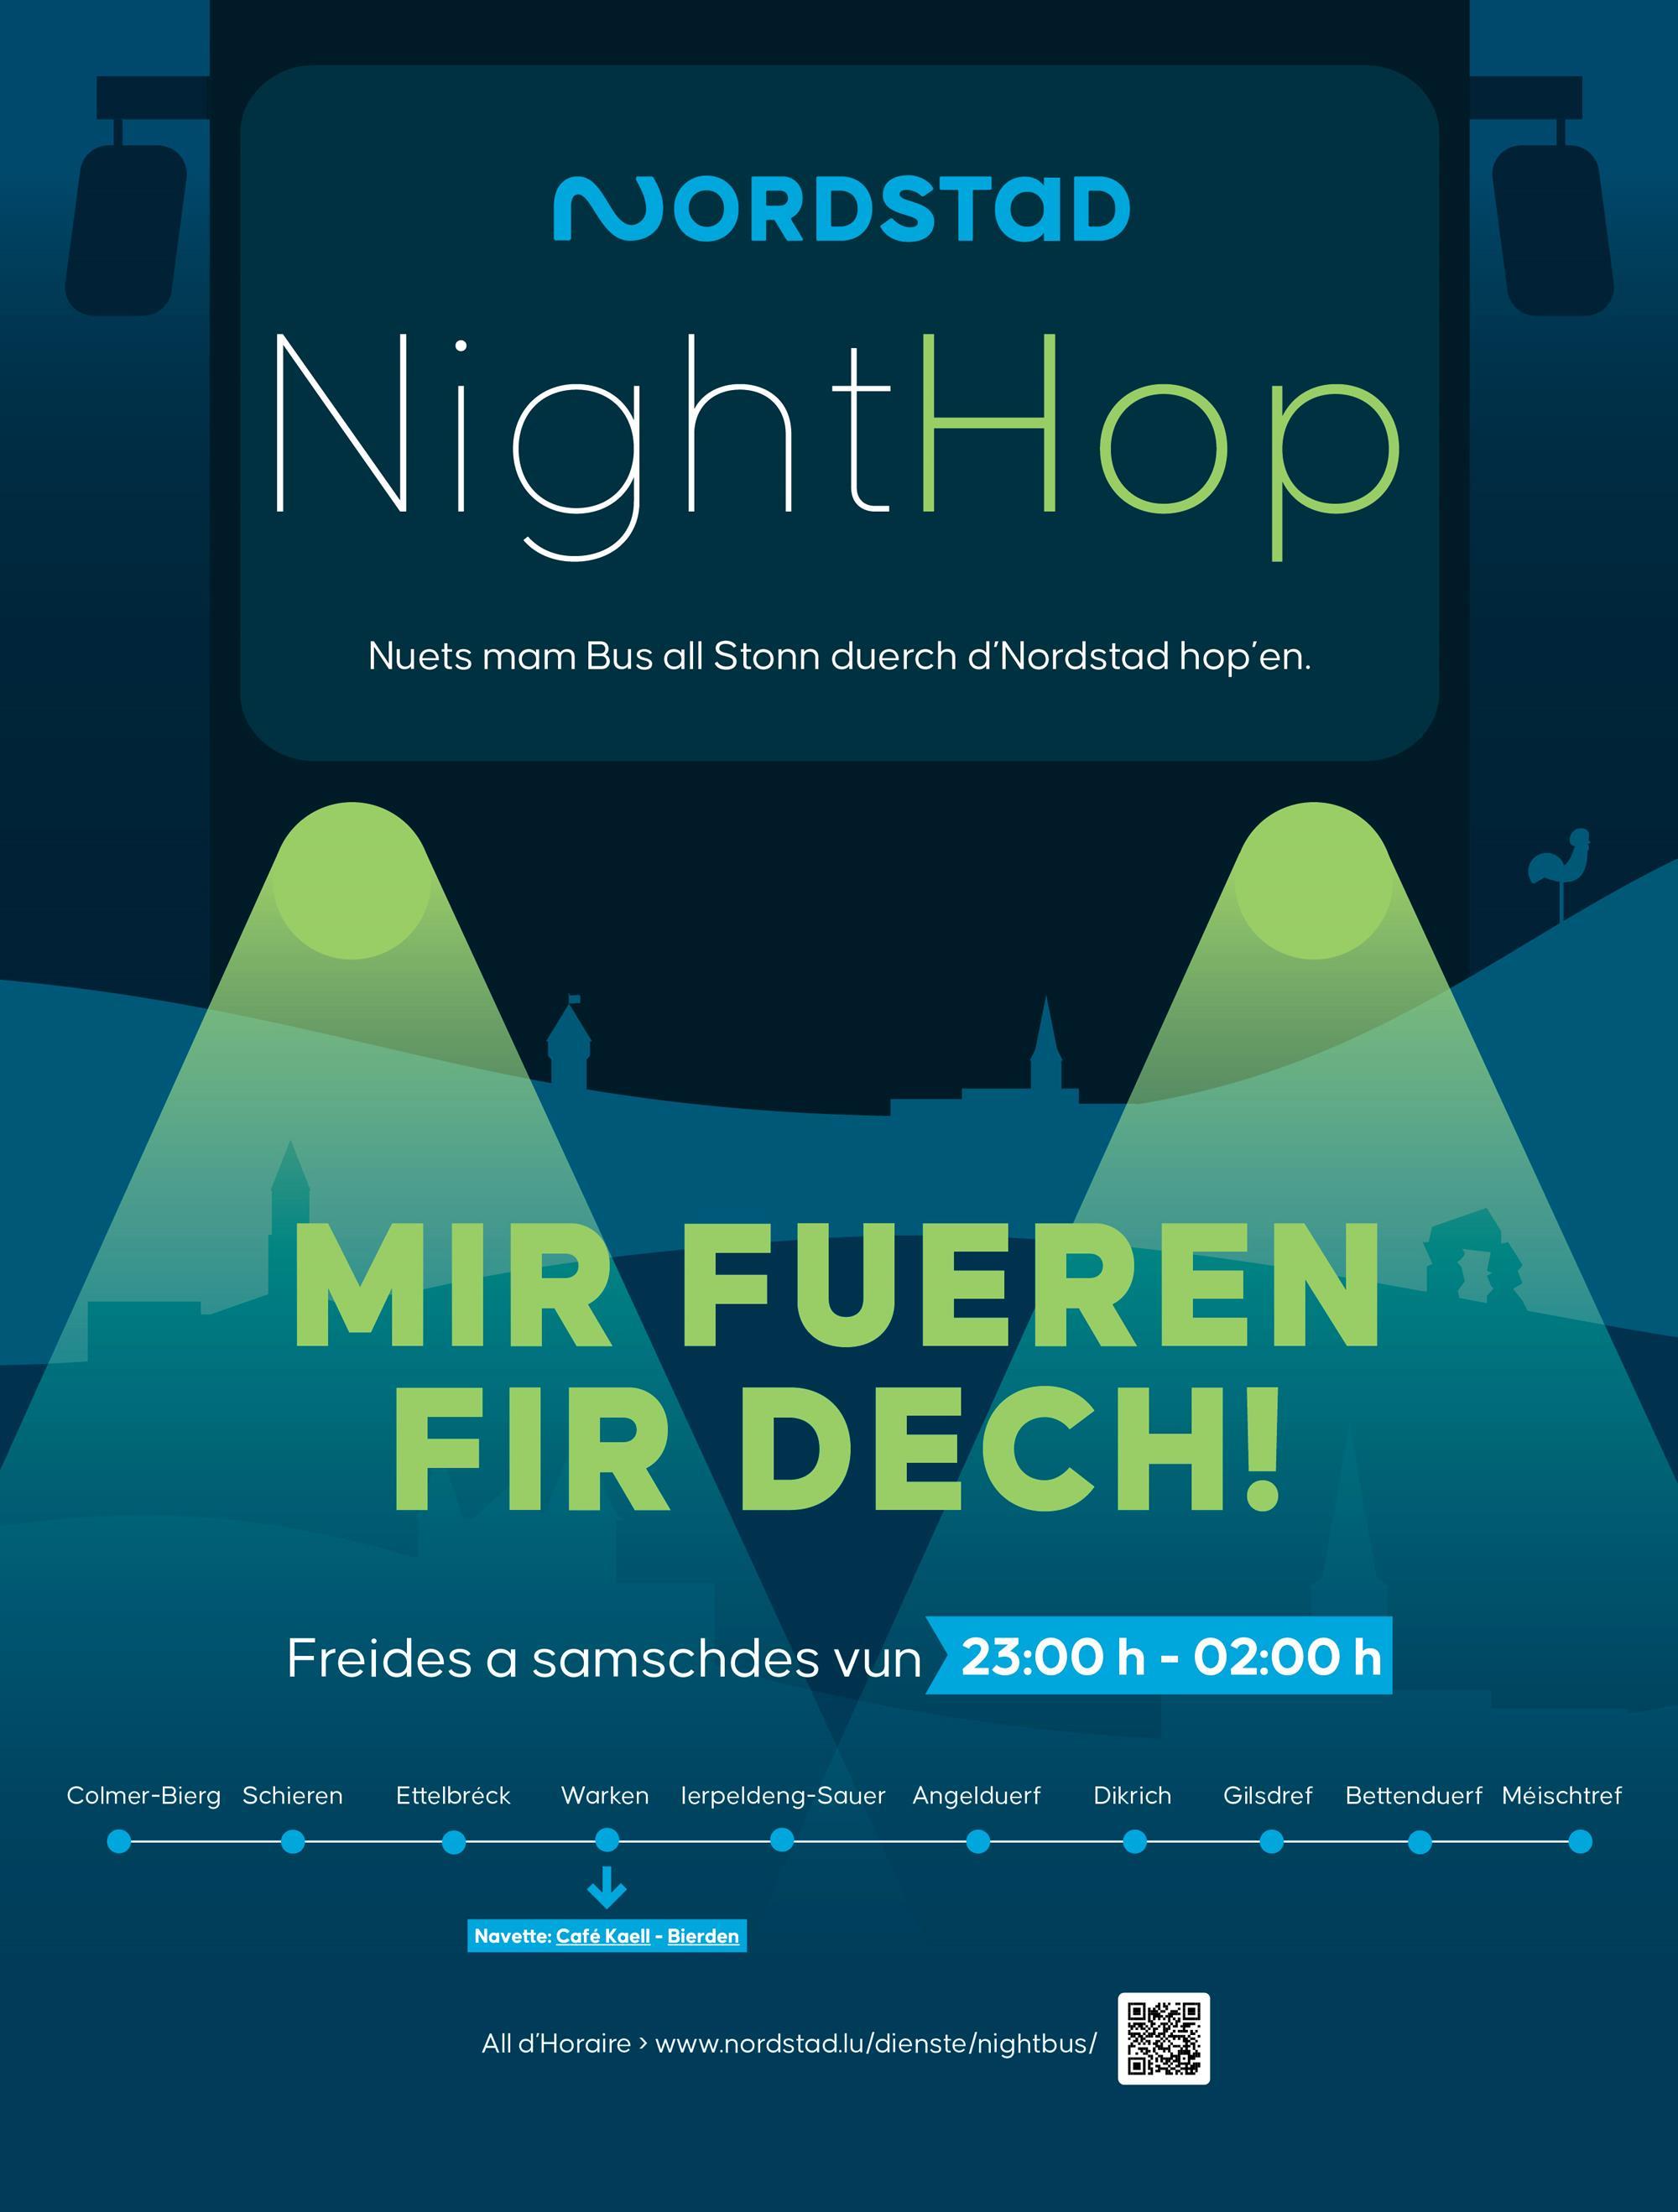 Nighthop - Services